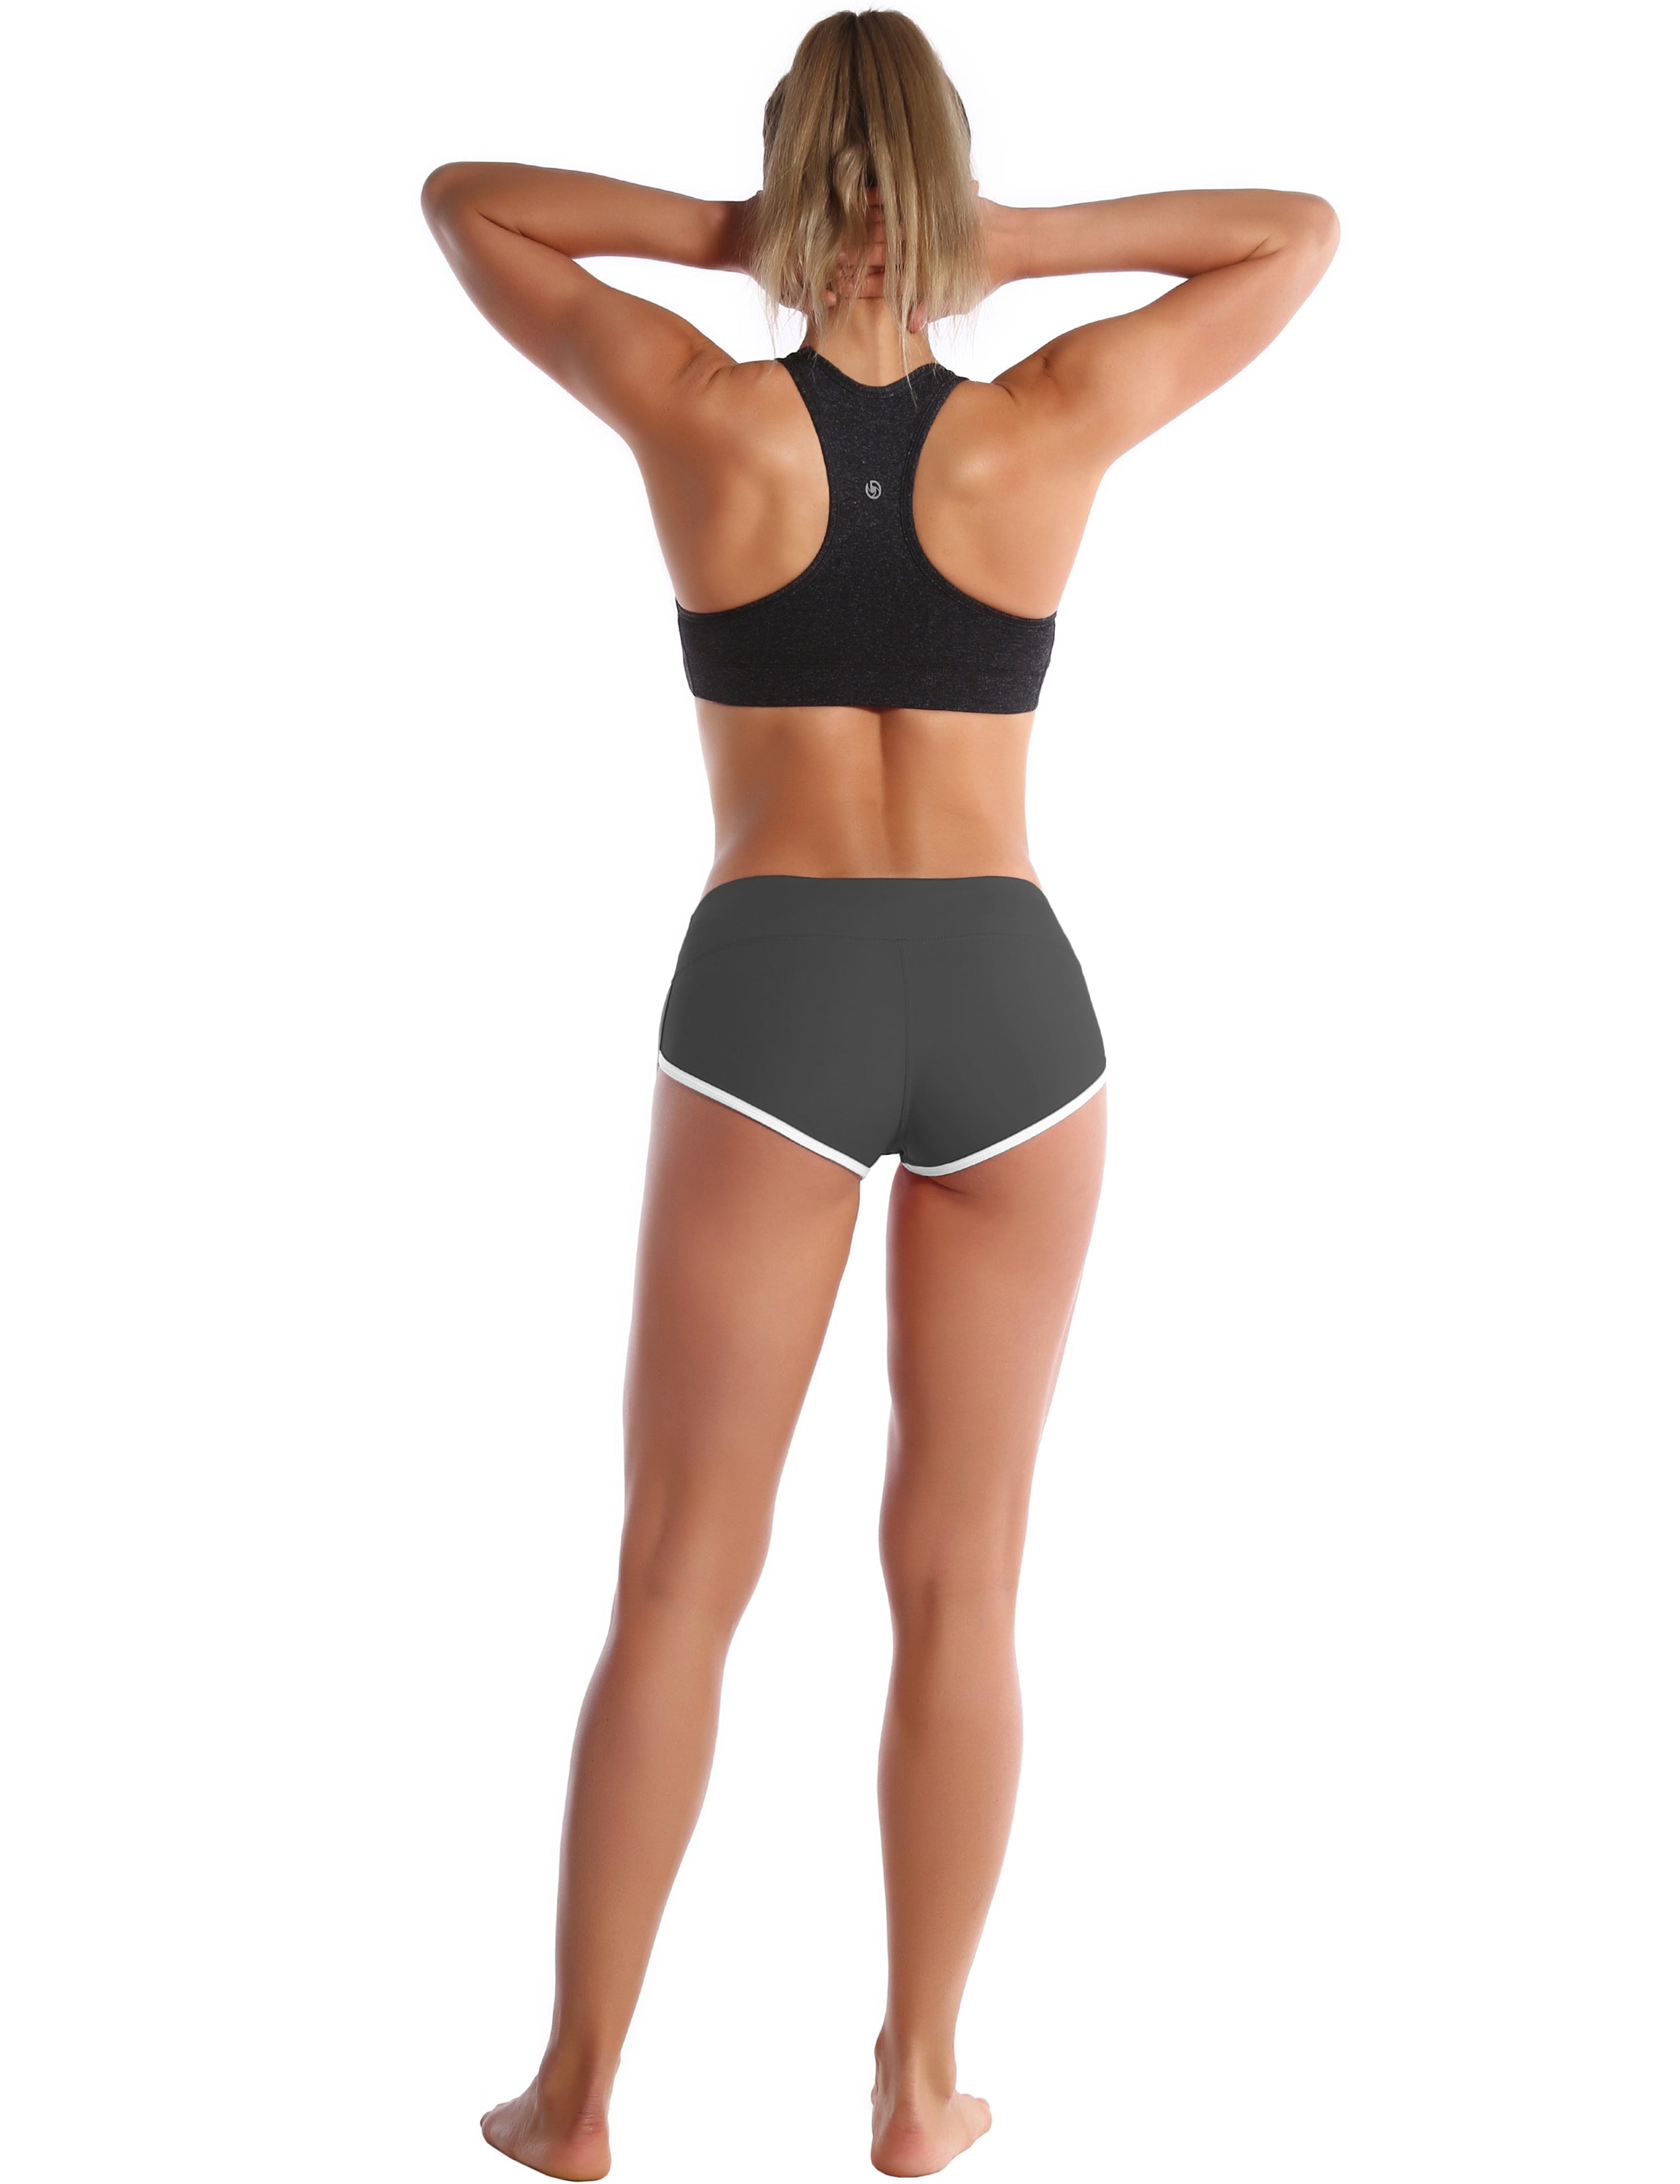 Sexy Booty Pilates Shorts shadowcharcoal Sleek, soft, smooth and totally comfortable: our newest sexy style is here. Softest-ever fabric High elasticity High density 4-way stretch Fabric doesn't attract lint easily No see-through Moisture-wicking Machine wash 75%Nylon/25%Spandex